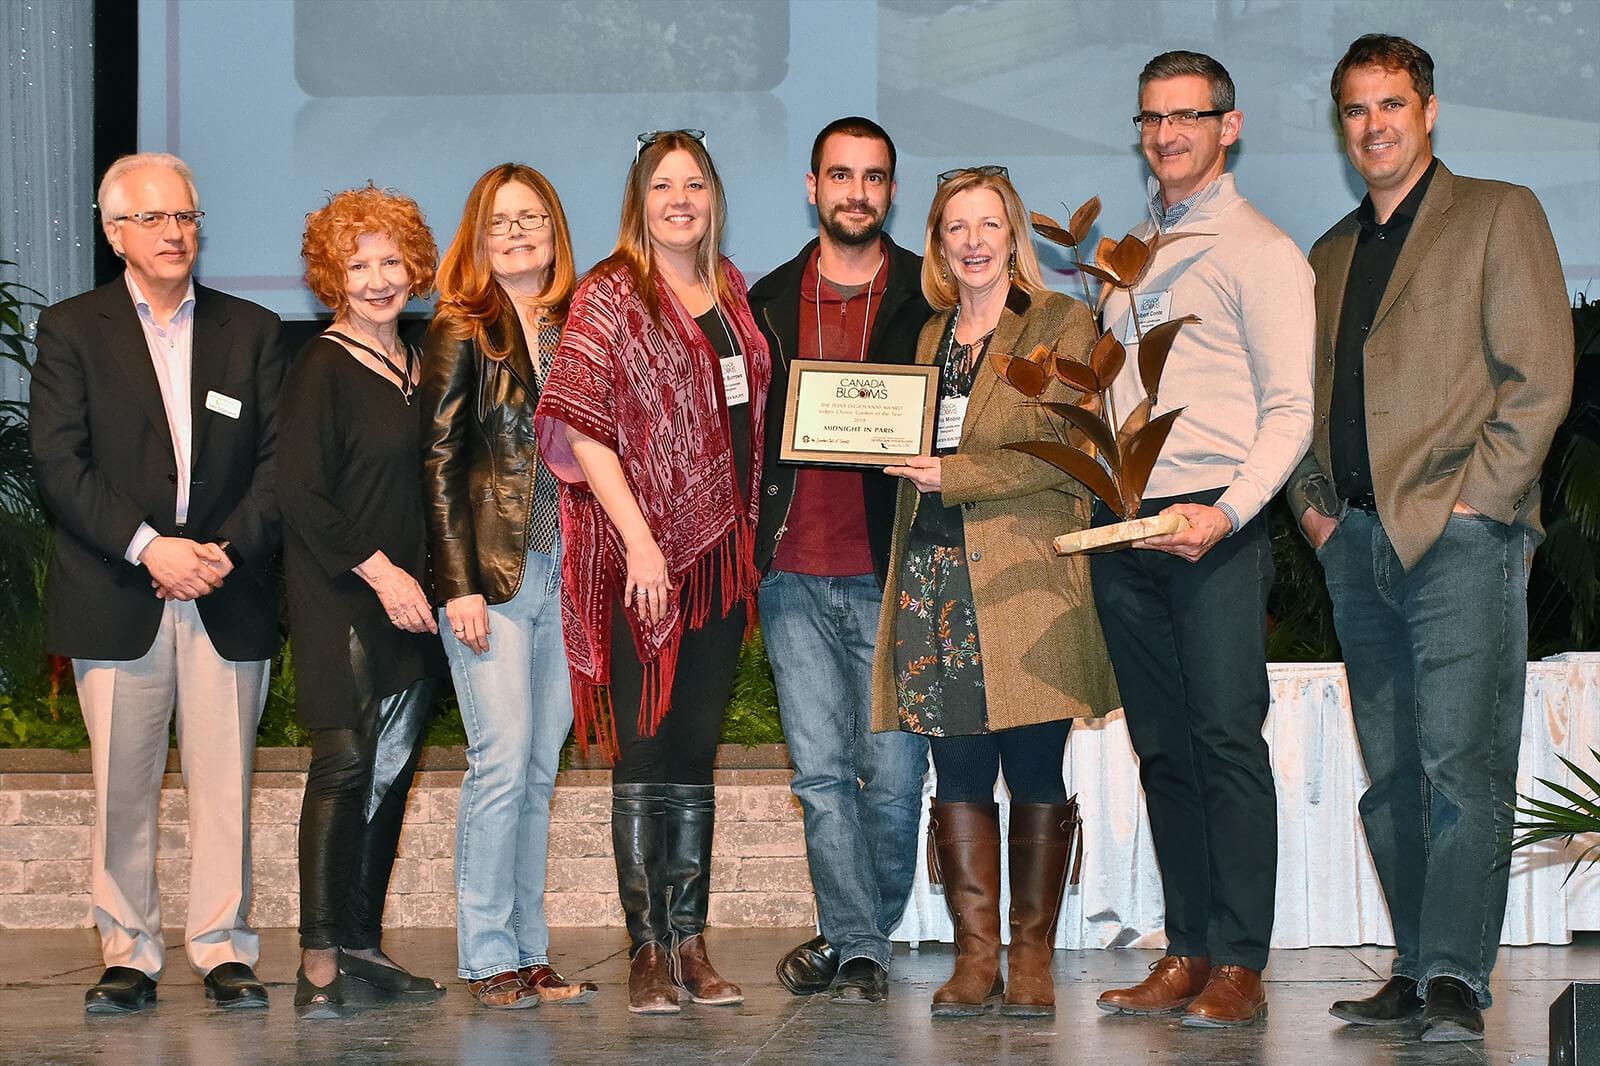 Modern Landscape Designers and Trimatrix Construction receive the Garden of the Year Award on stage at Canada Blooms.